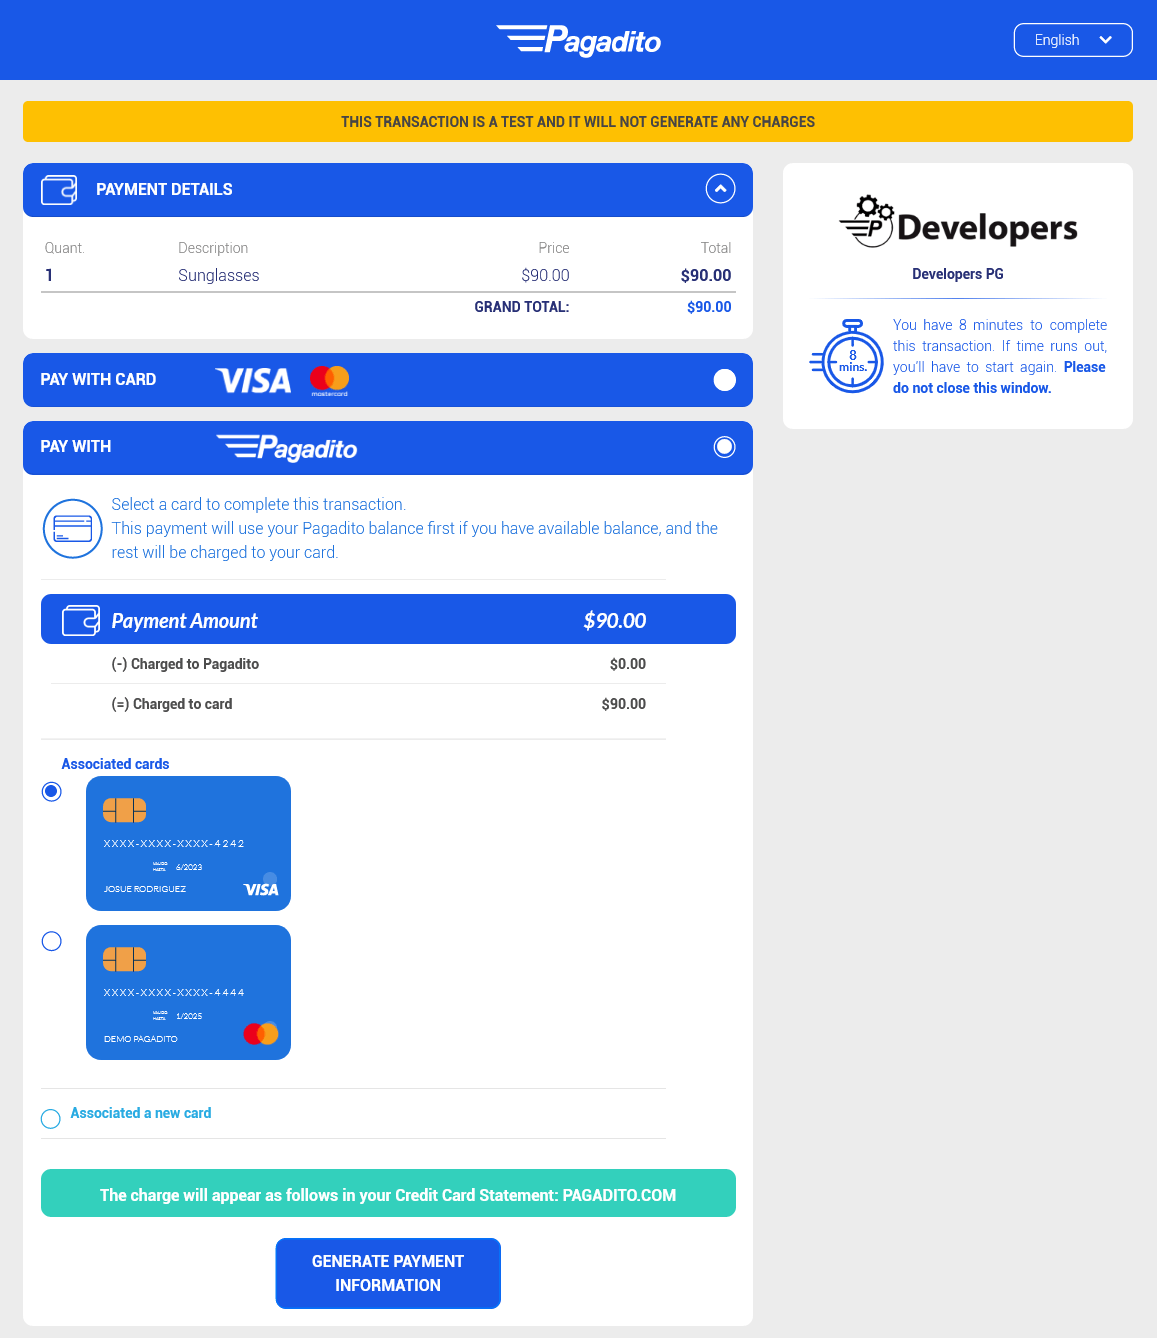 Successful payment confirmation screen.